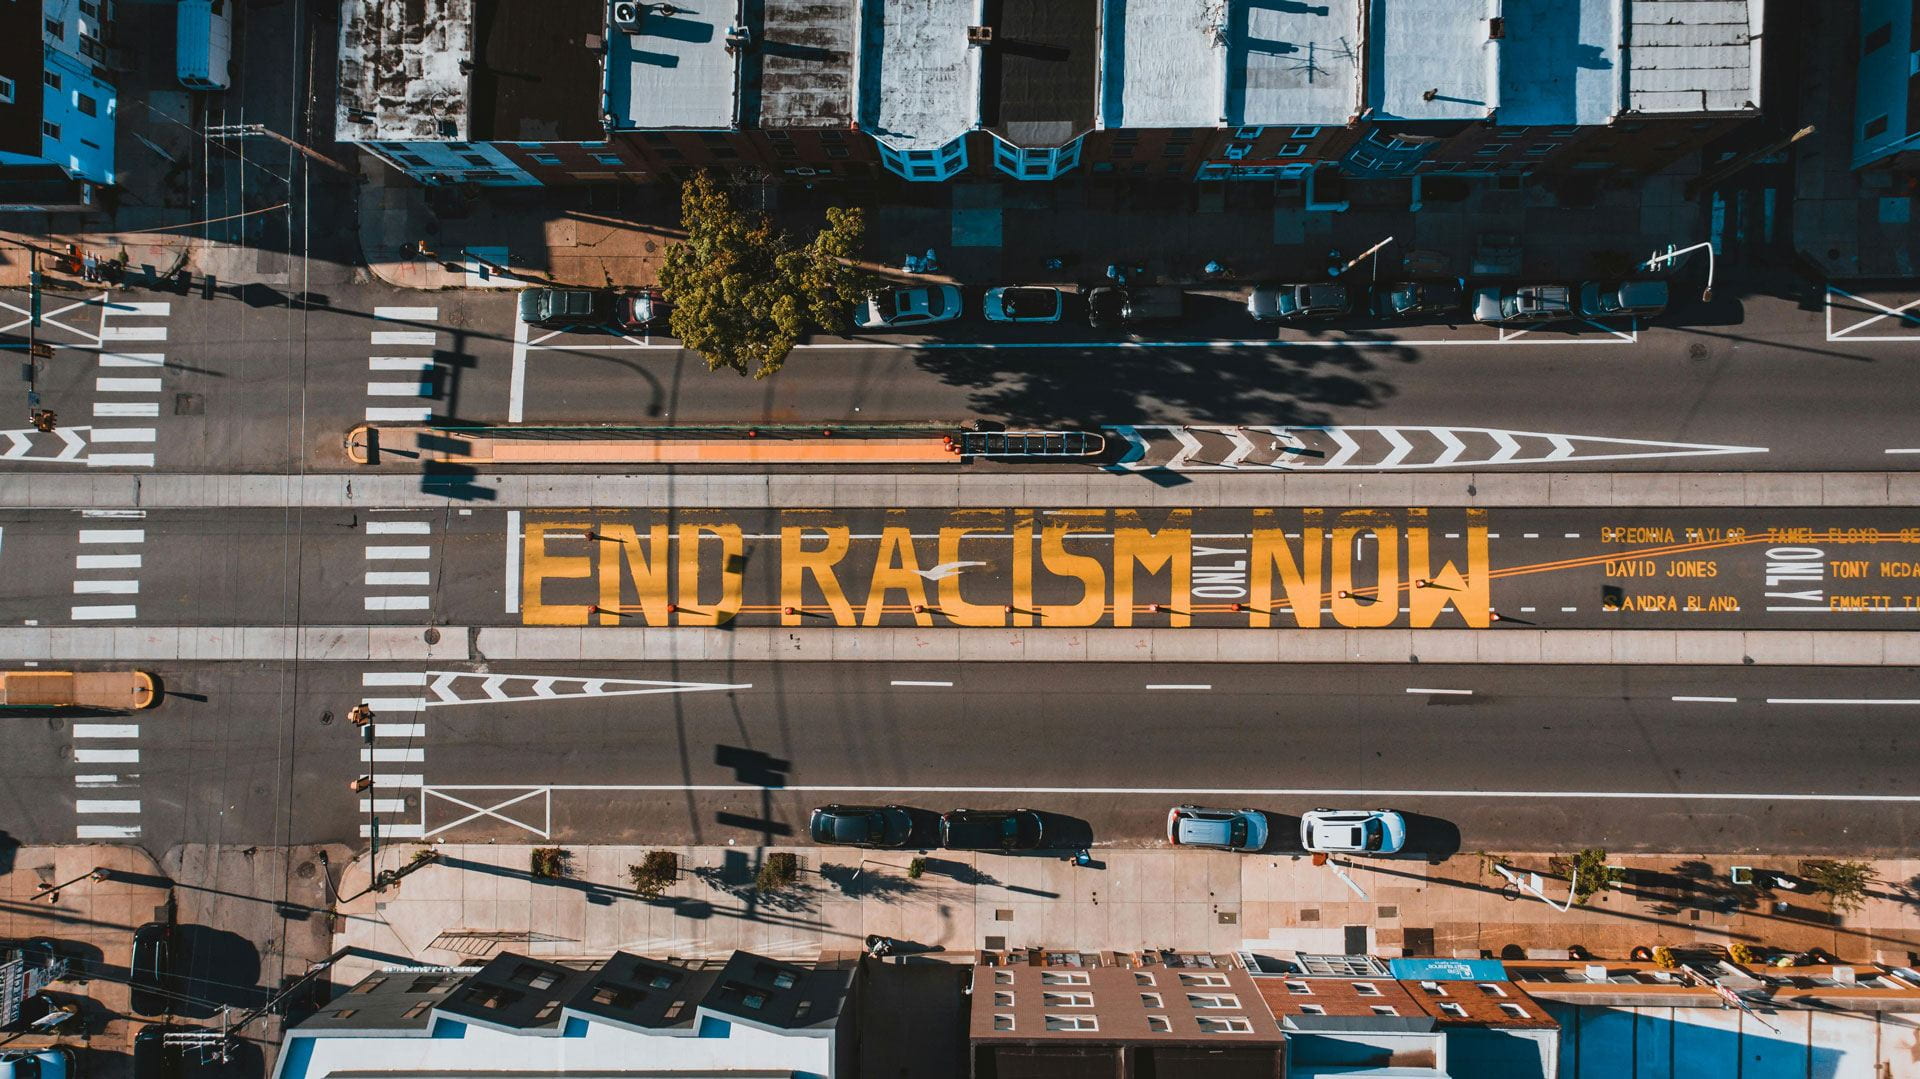 Addressing racism and Islamophobia under the rules of colorblindness: When social movements engage in category work to reform the meanings of regulatory categories